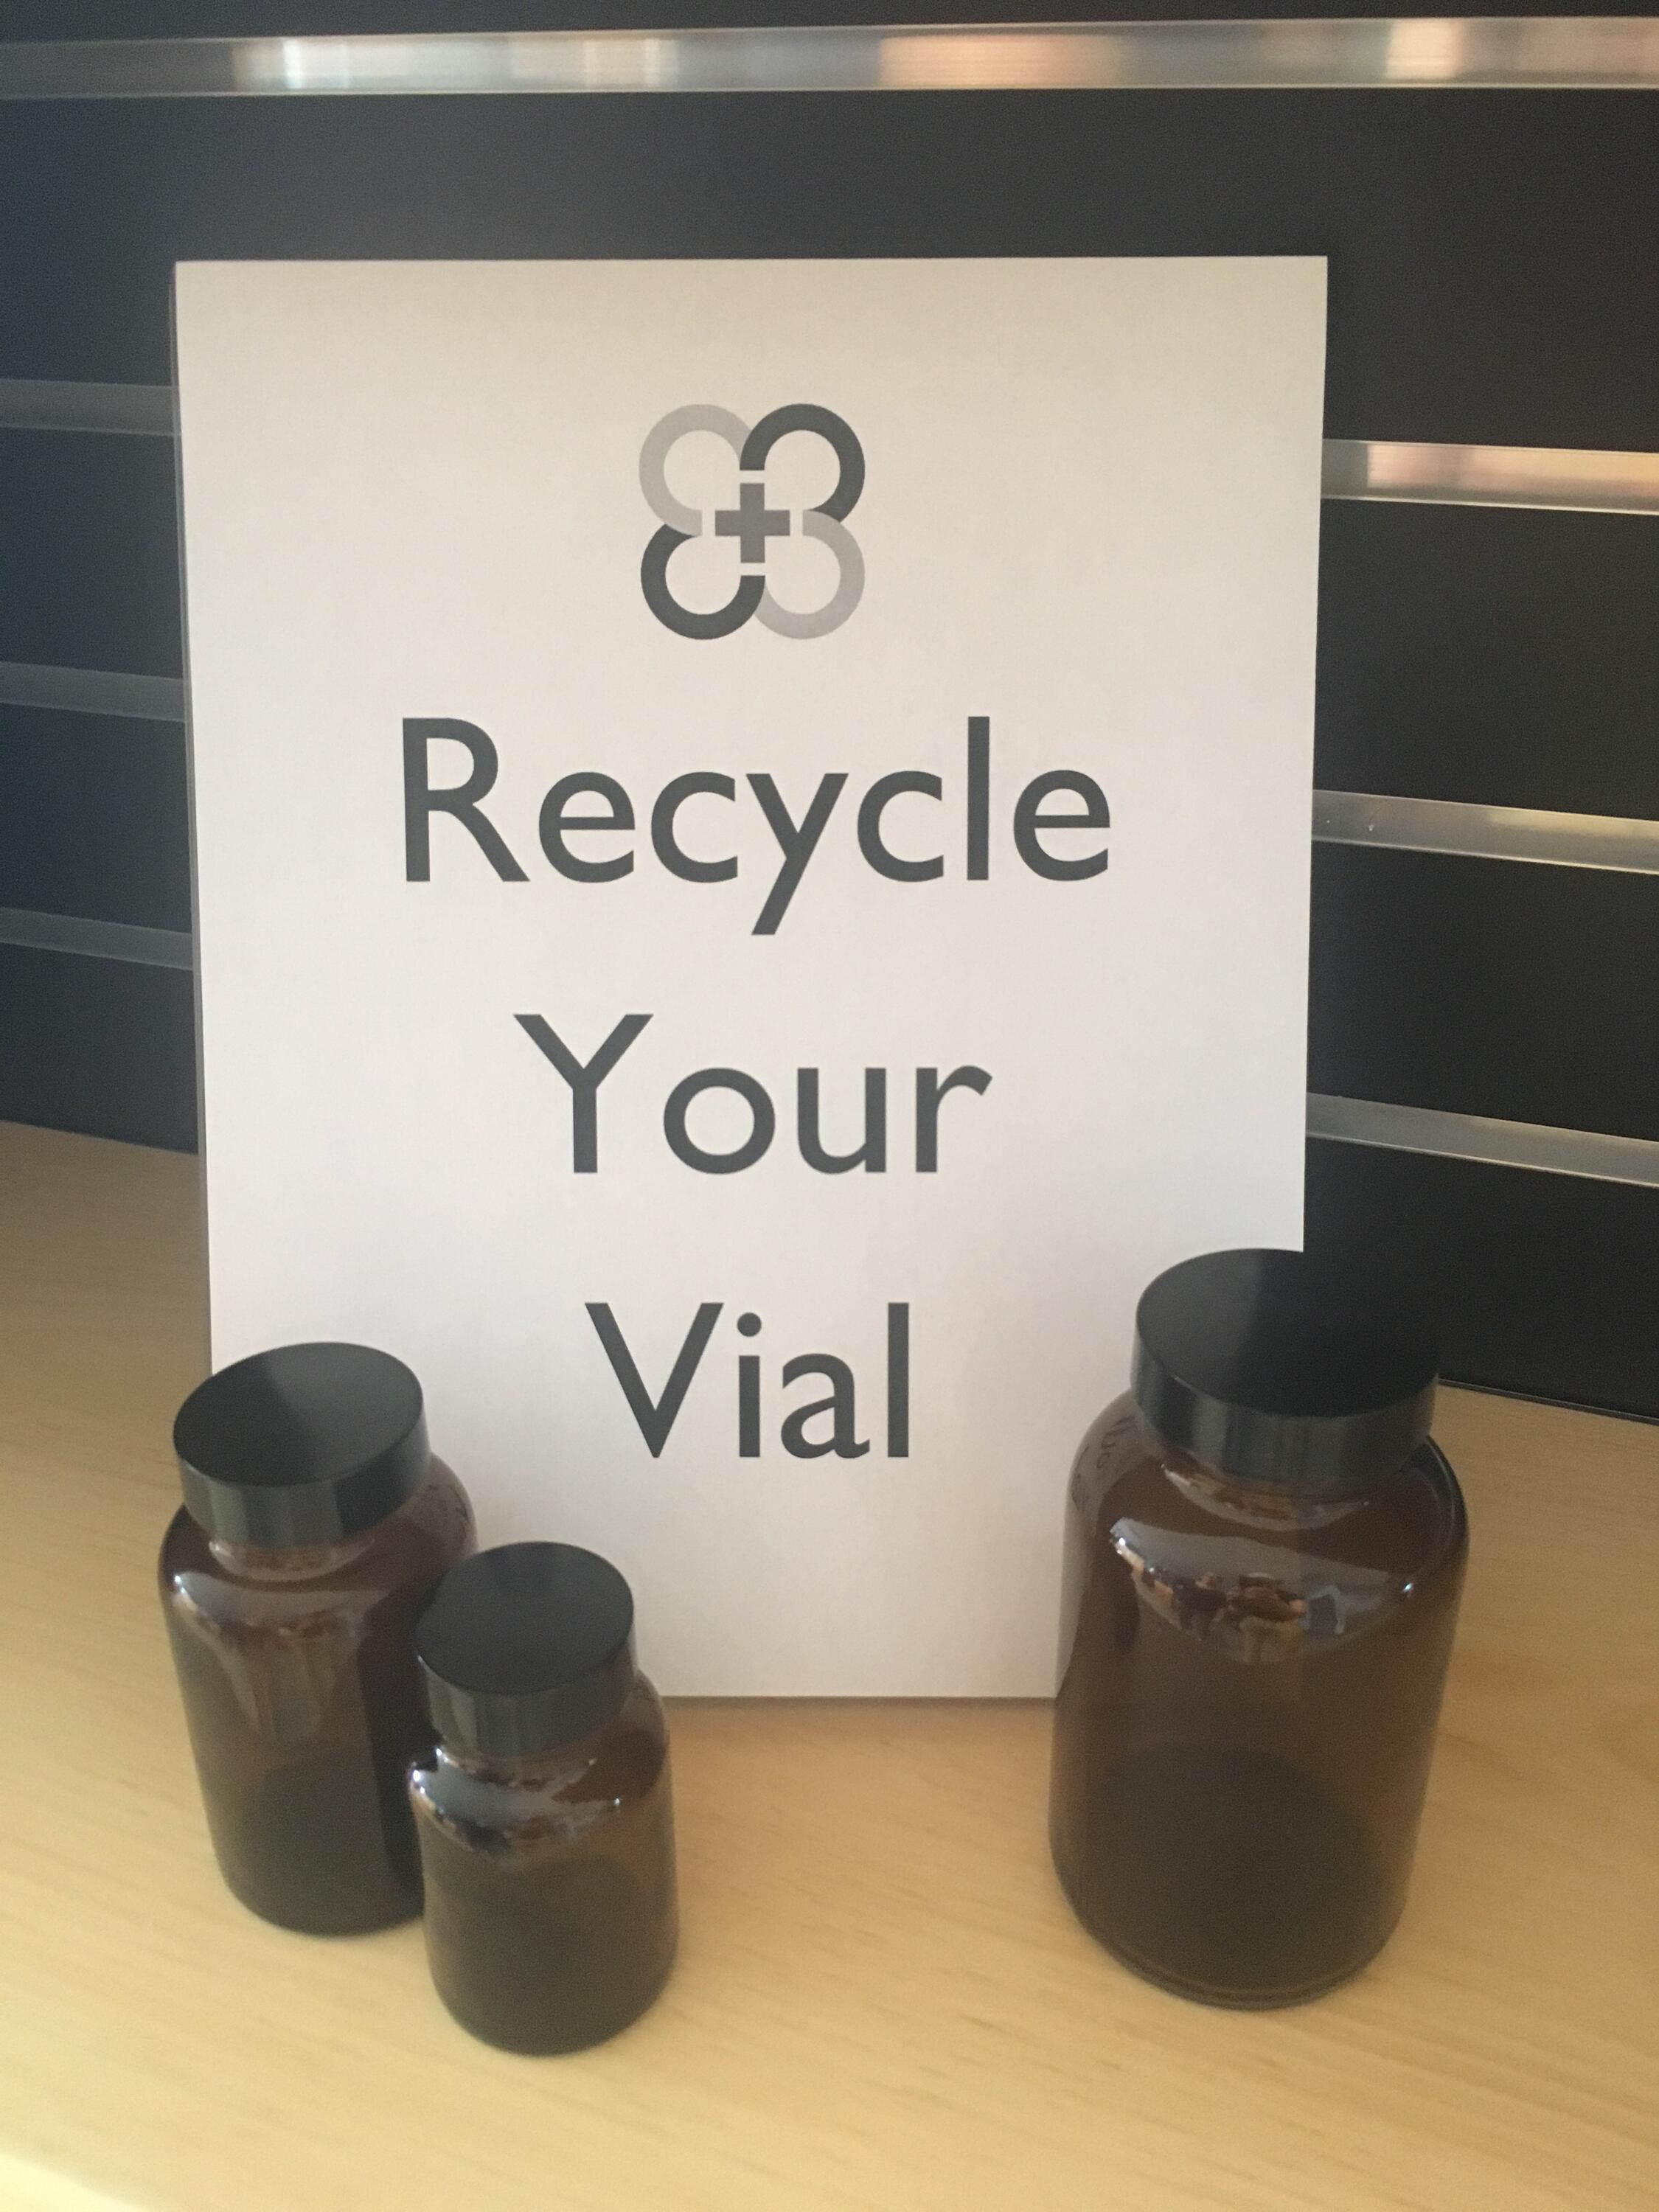 Recycle your vial sign with three amber glass vials